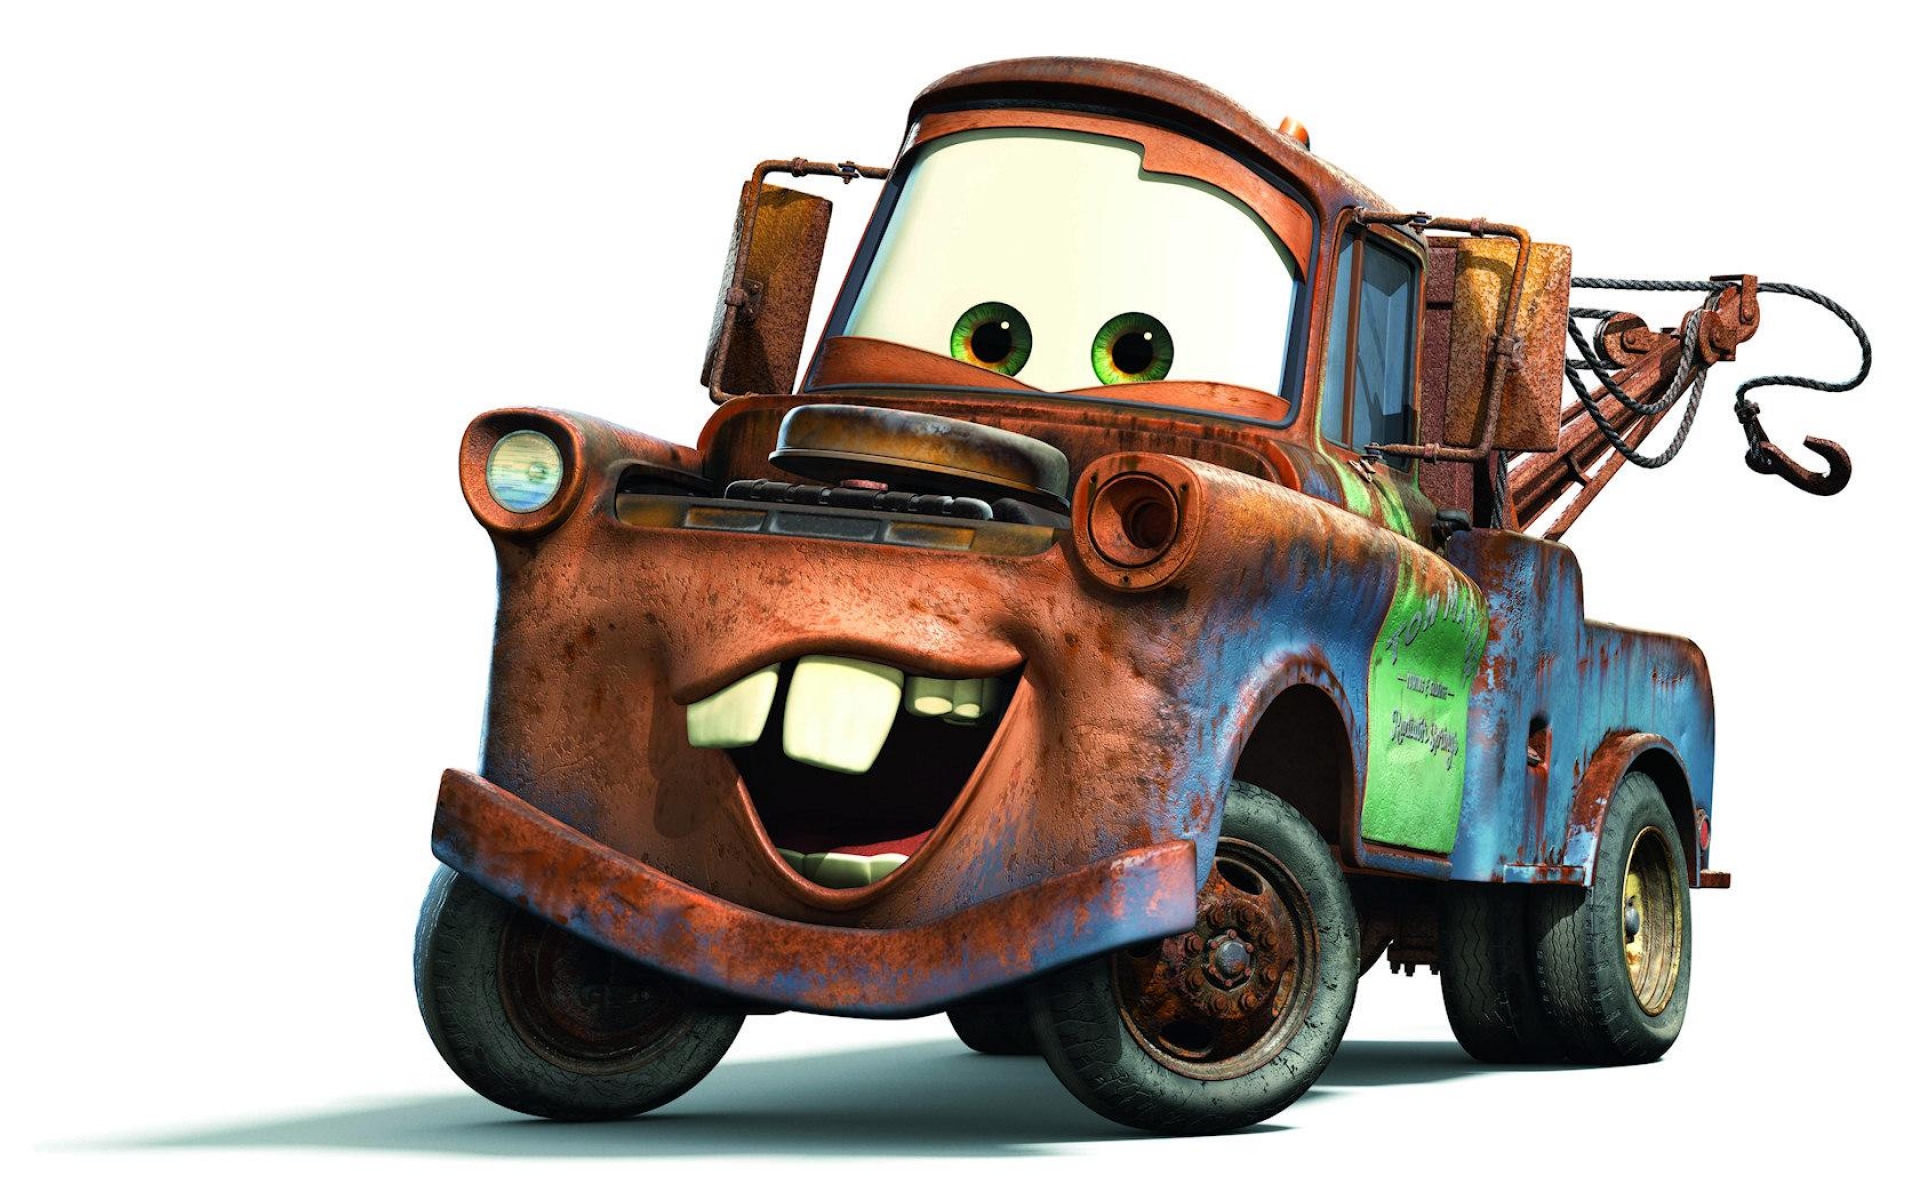 cartoon cars images - DriverLayer Search Engine